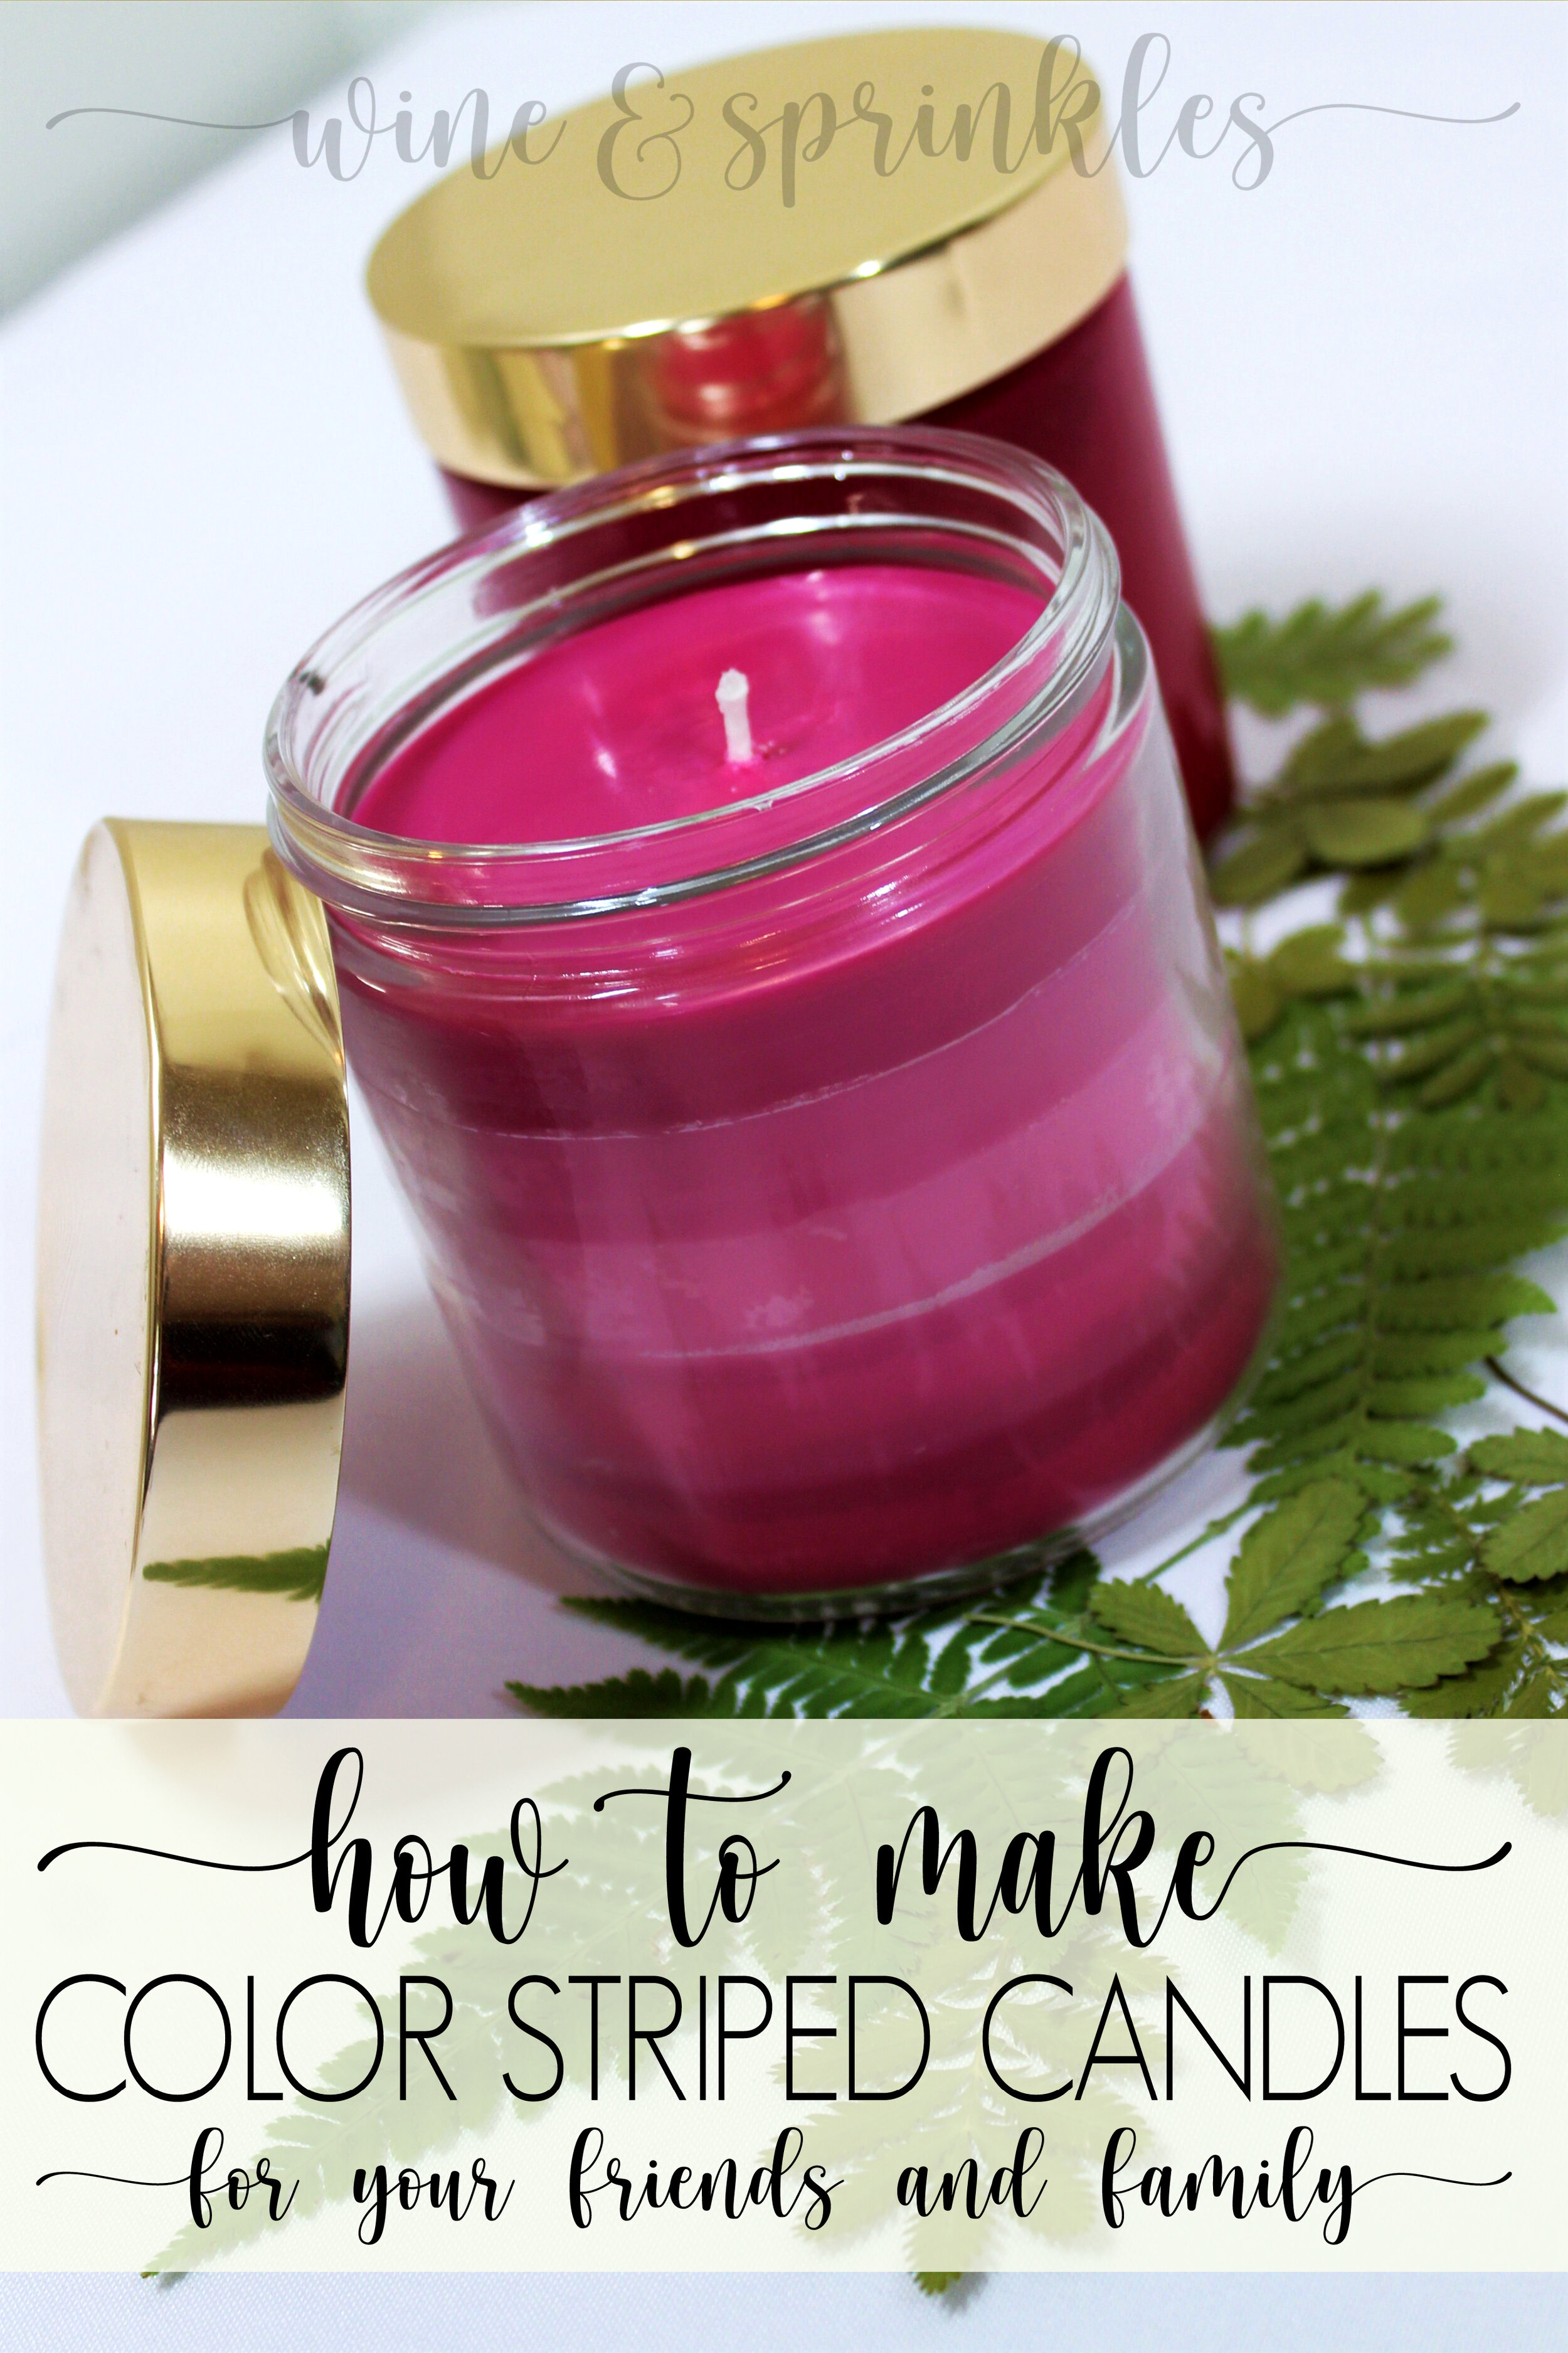 Intro to Candle Making with Soy Wax